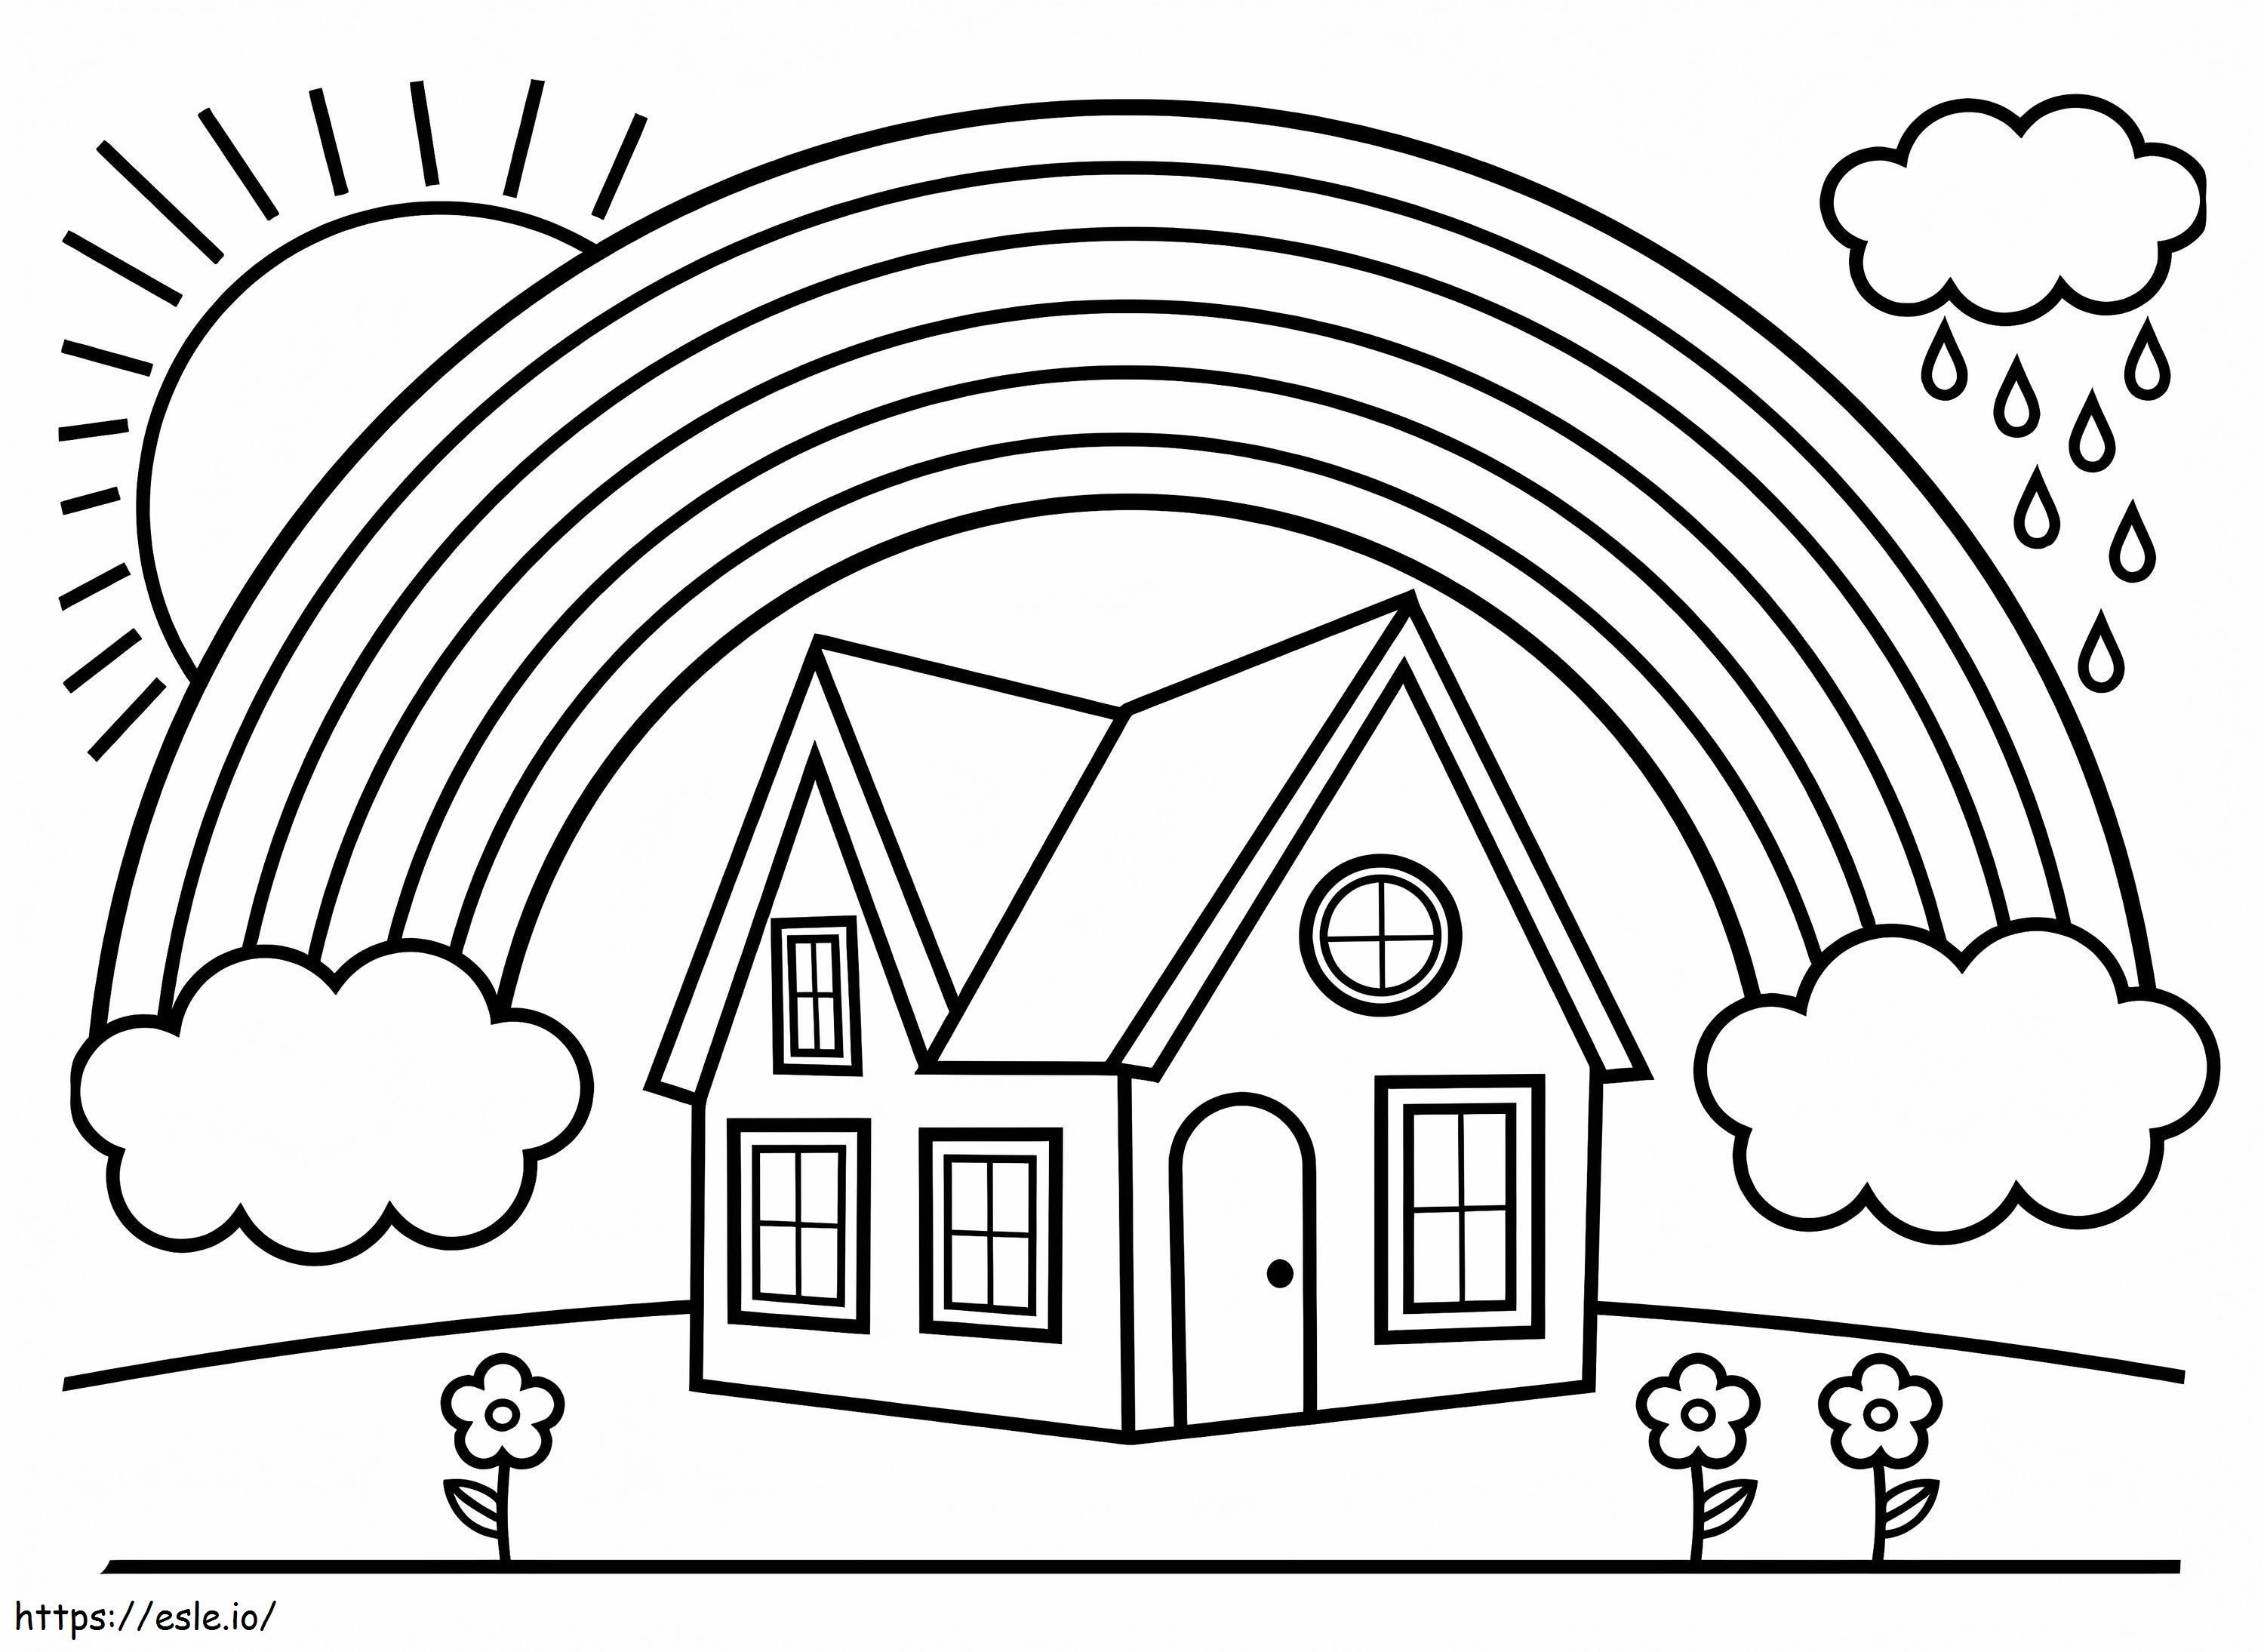 Rainbow And House coloring page